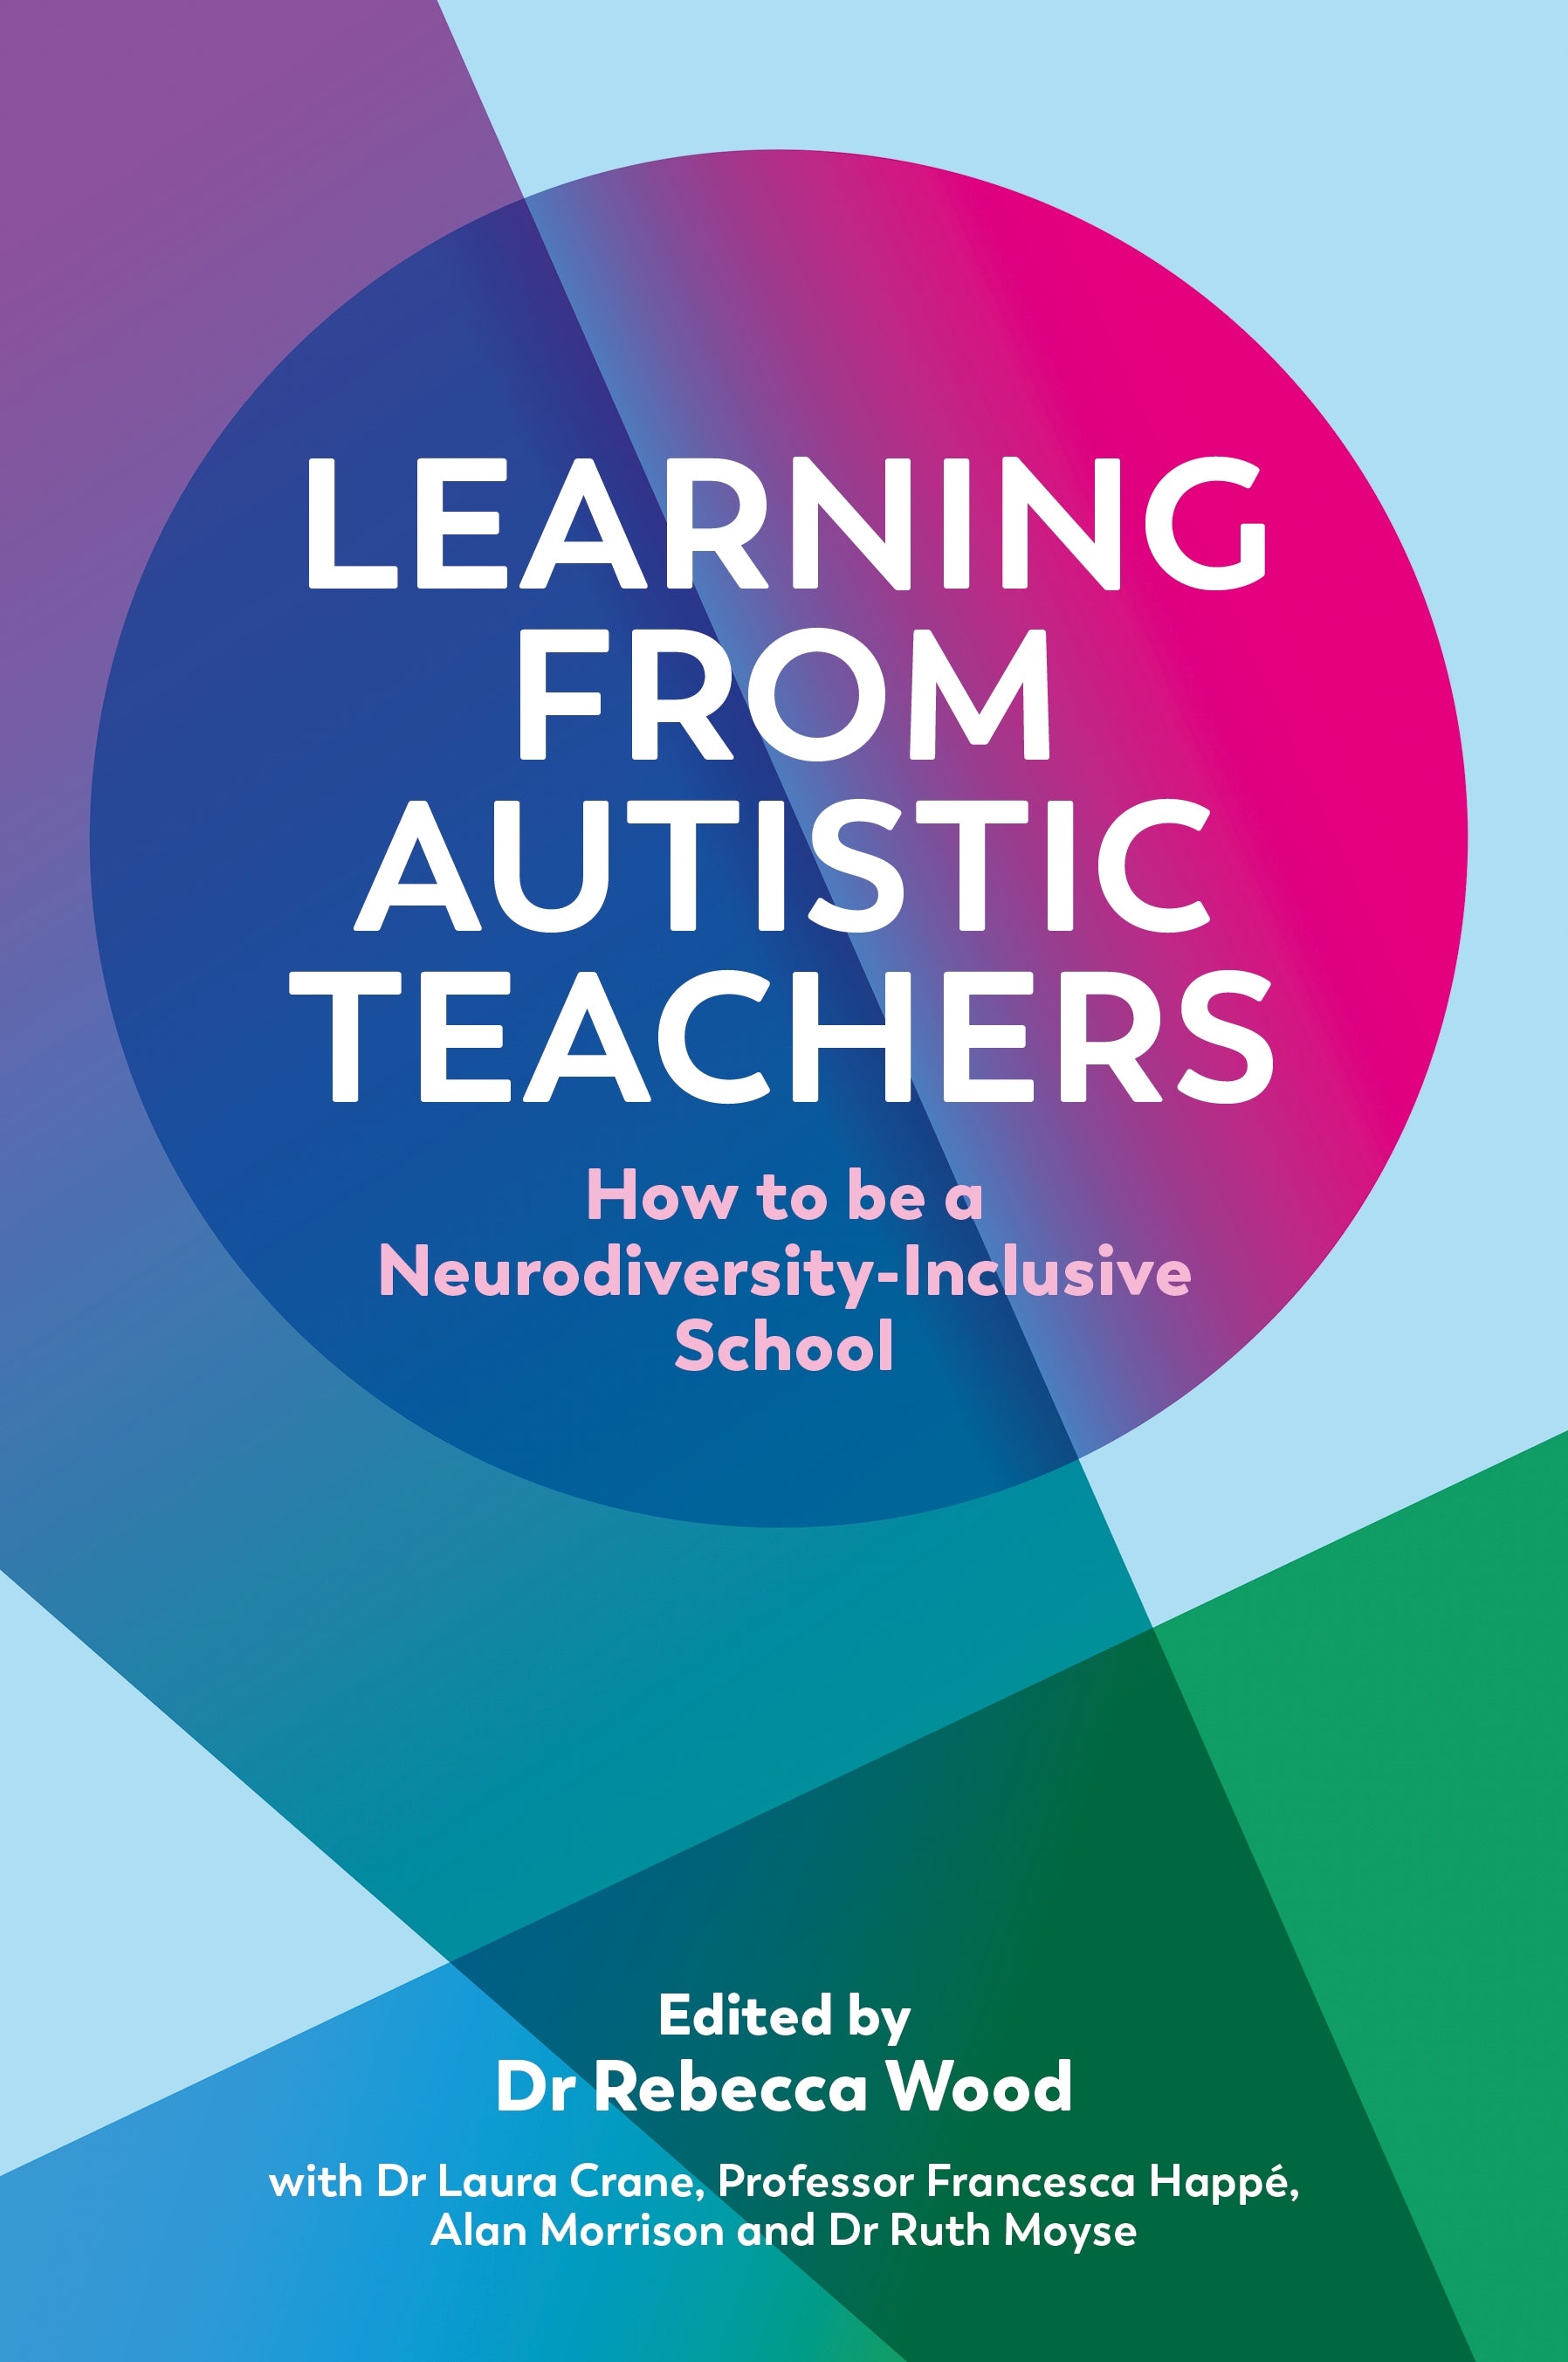 Learning From Autistic Teachers by No Author Listed, Francesca Happé, Rebecca Wood, Dr Laura Crane, Alan Morrison, Ruth Moyse